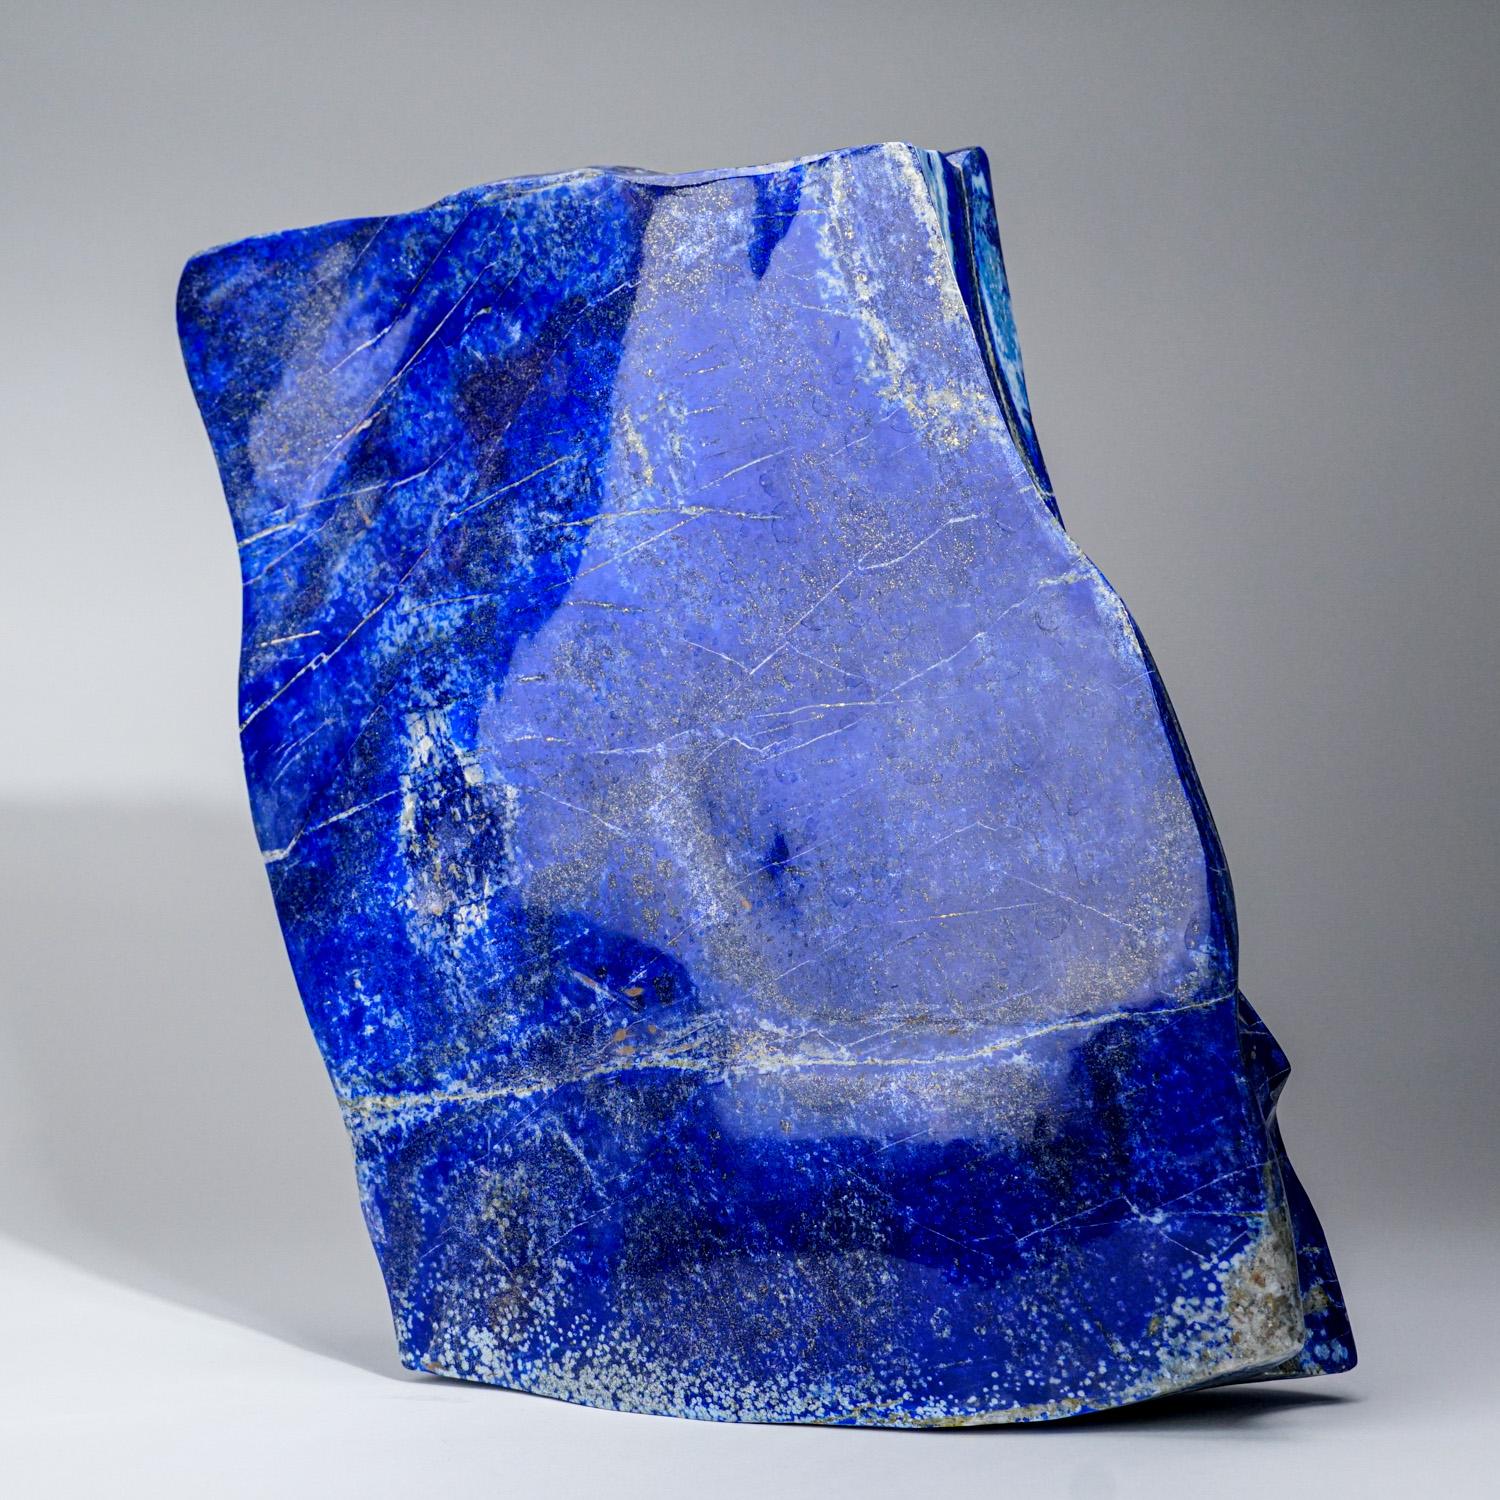 Beautiful hand-polished free form of AAA quality natural Afghani lapis lazuli. This specimen has rich, electric-royal blue color enriched with scintillating pyrite micro-crystals.

Lapis Lazuli is a powerful crystal for activating the higher mind